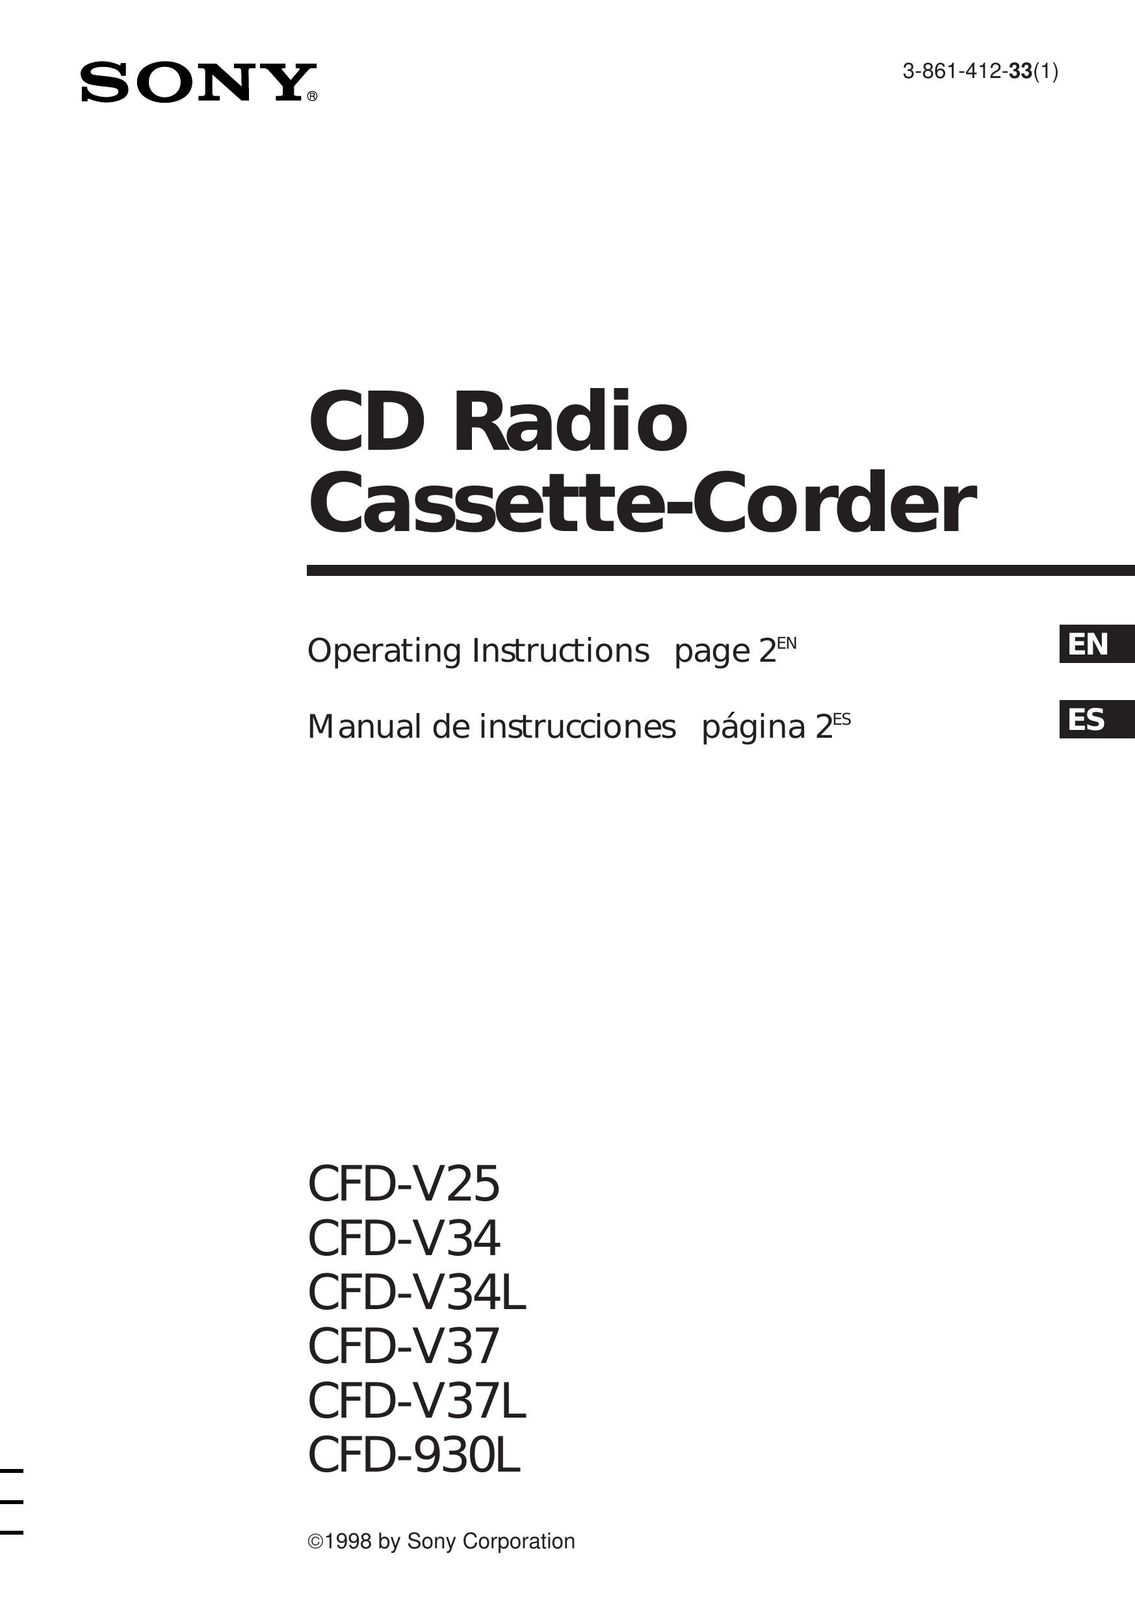 Sony CFD-930L Cassette Player User Manual